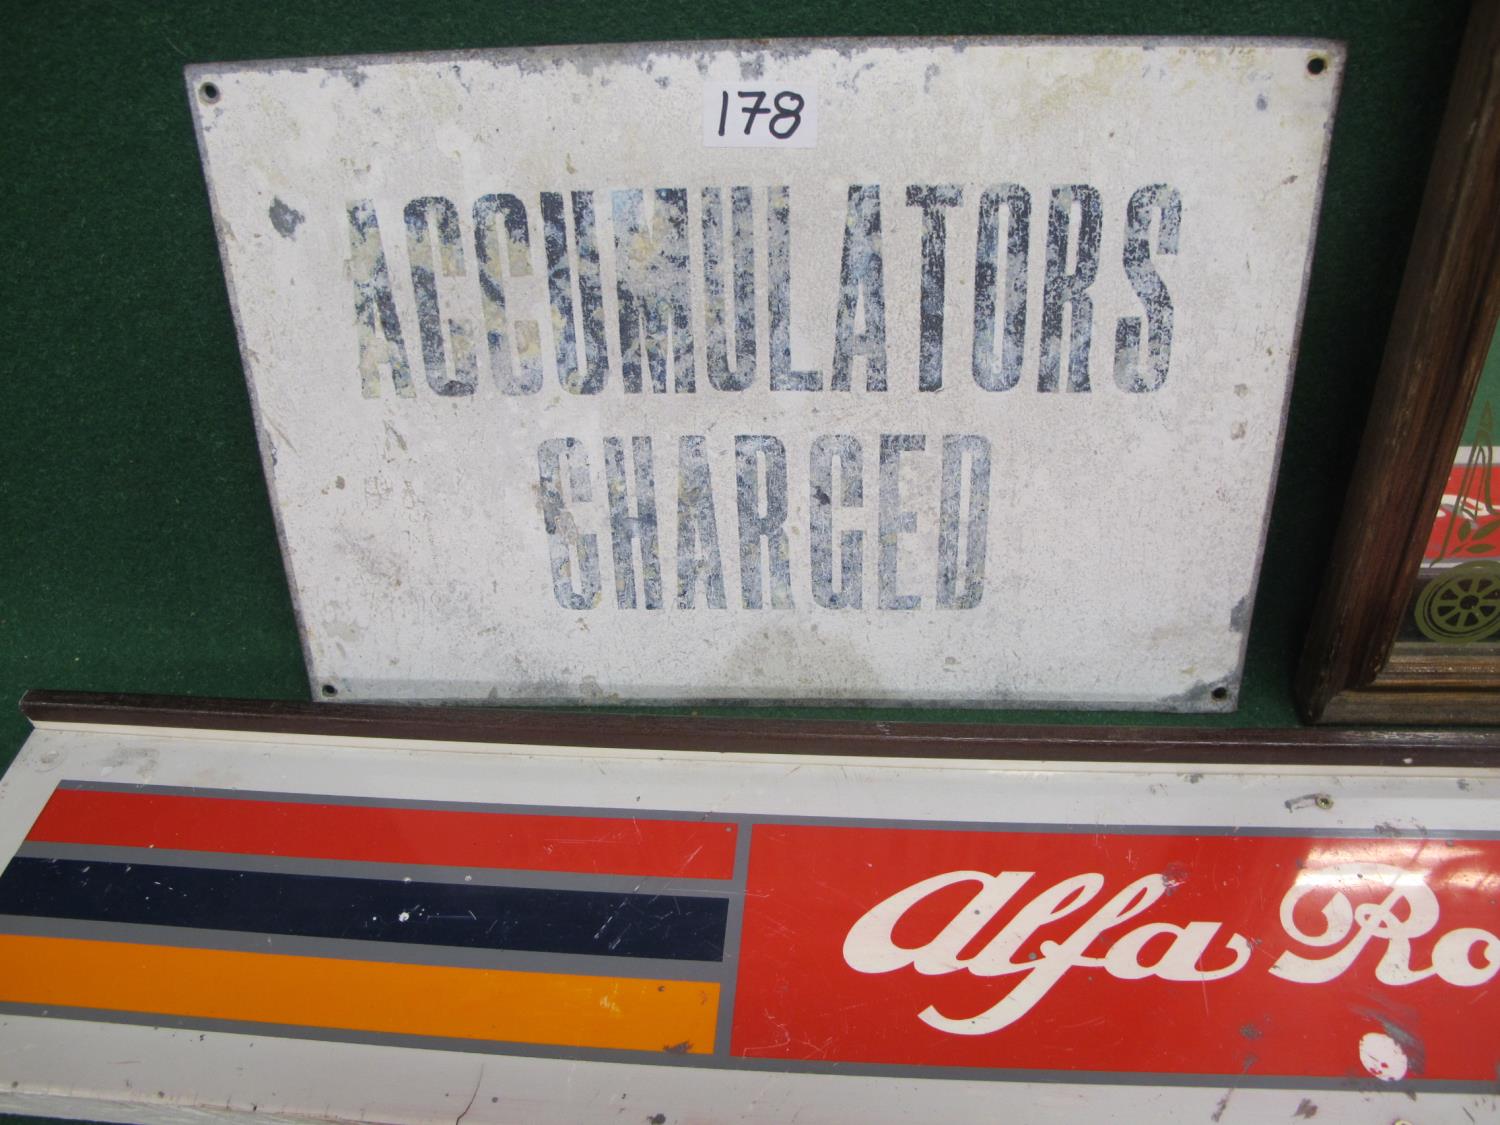 Galvanised sign Accumulators Charged - 15.25" x 10.25", plastic sign for Alfa Romeo - 39.25" x 6" - Image 2 of 3